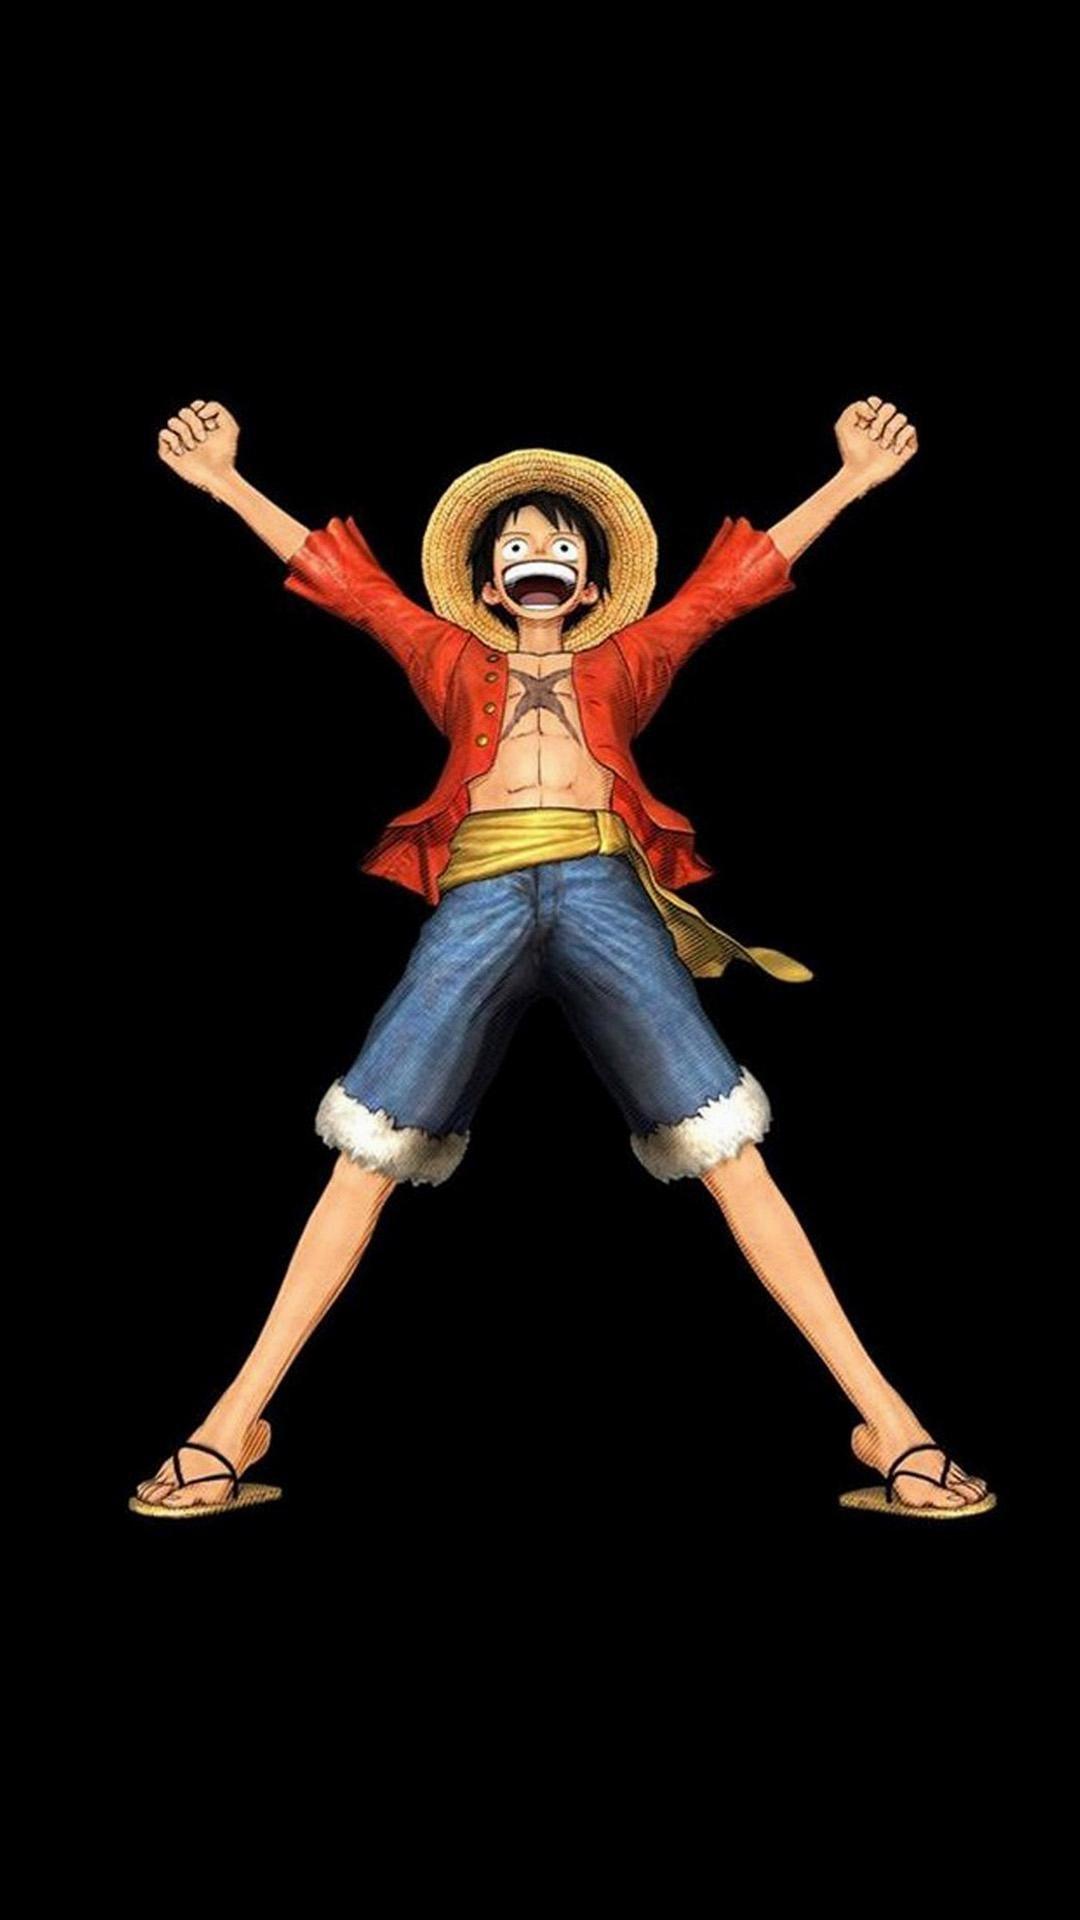 One Piece Hd 4k Iphone Wallpapers Wallpaper Cave